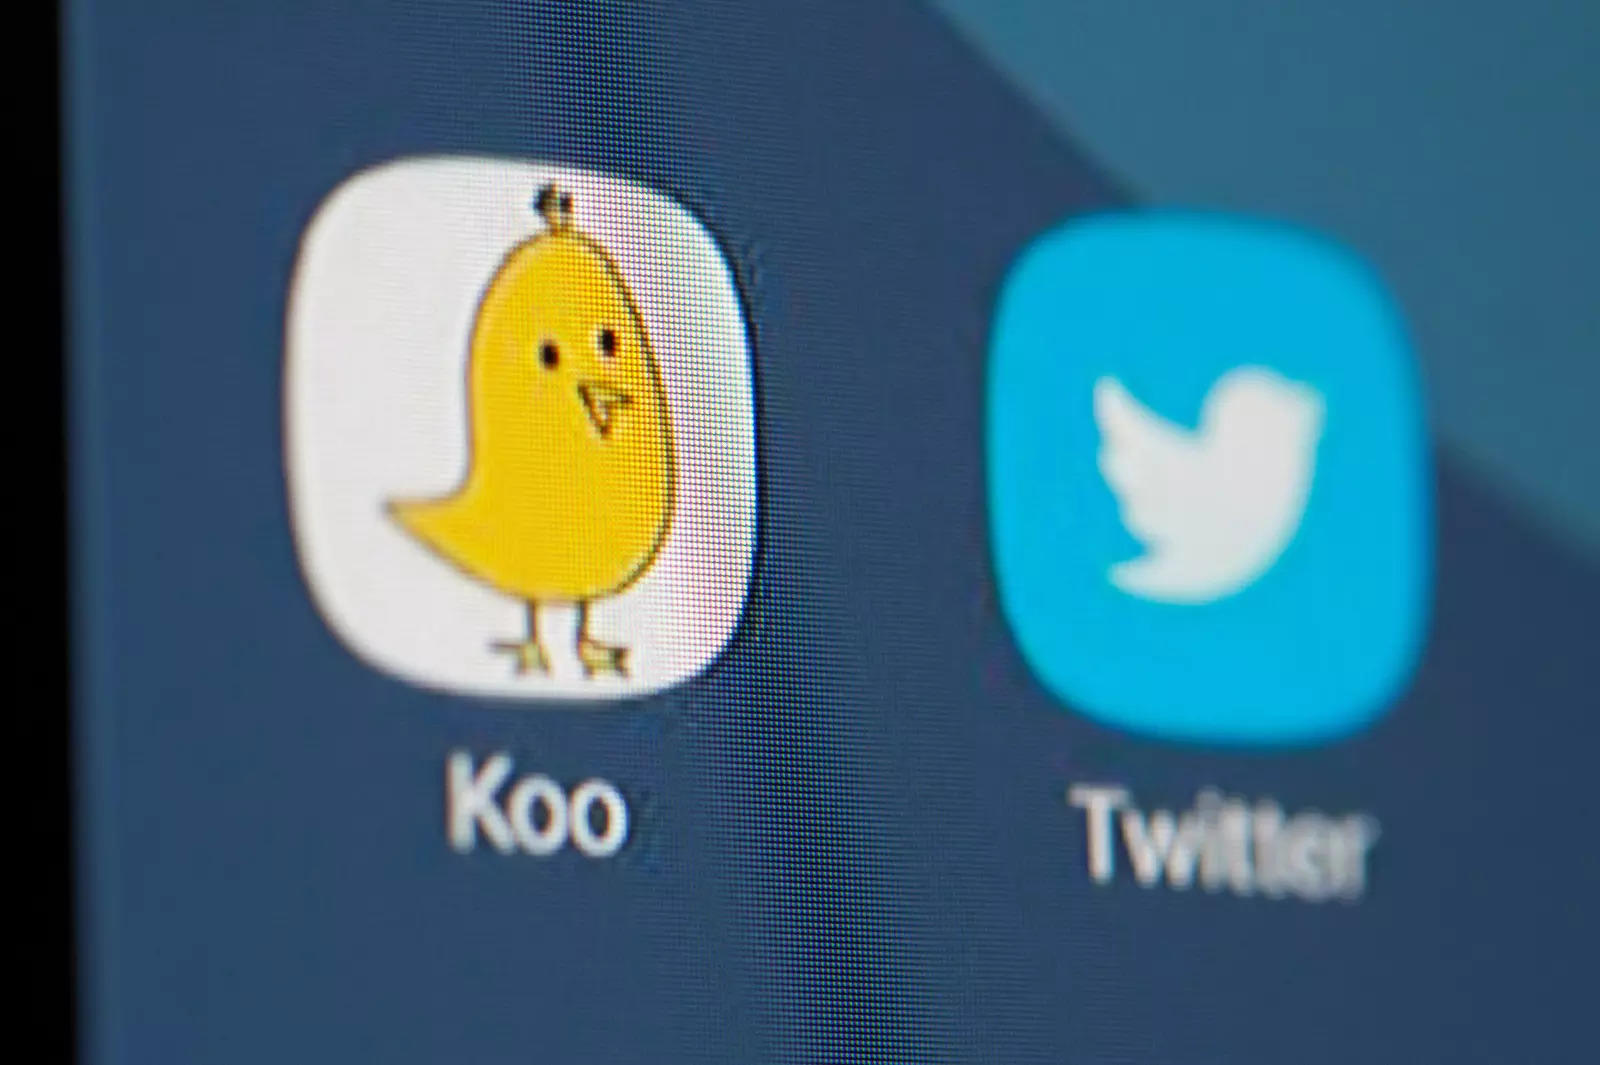 FILE PHOTO: Twitter and Koo app logos are seen on smartphone in this illustration taken